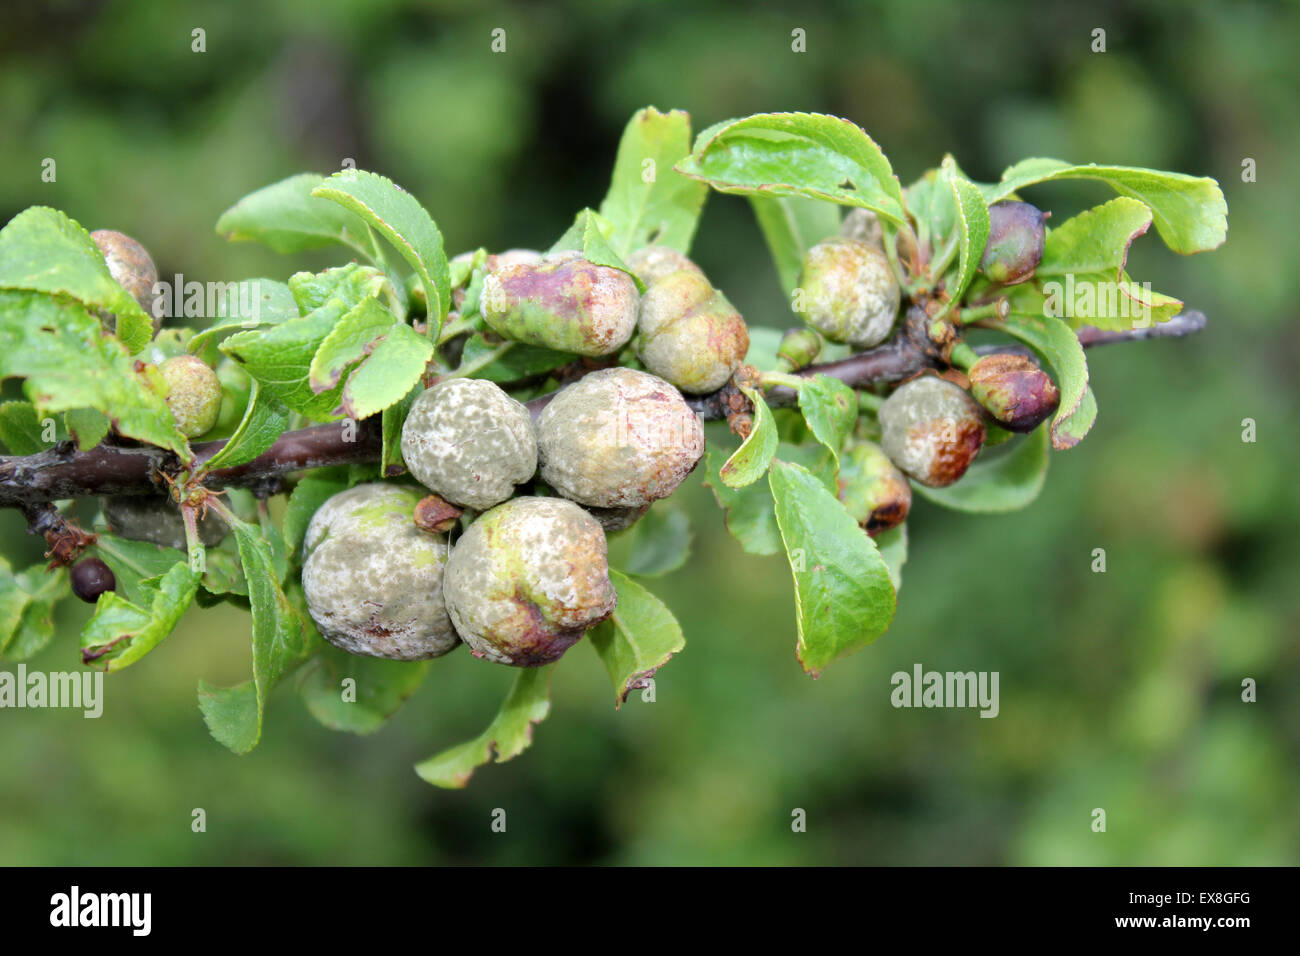 Galls on Sloe Prunus spinosa bushes called ‘pocket plums’ caused by the fungus Taphrina pruni Stock Photo